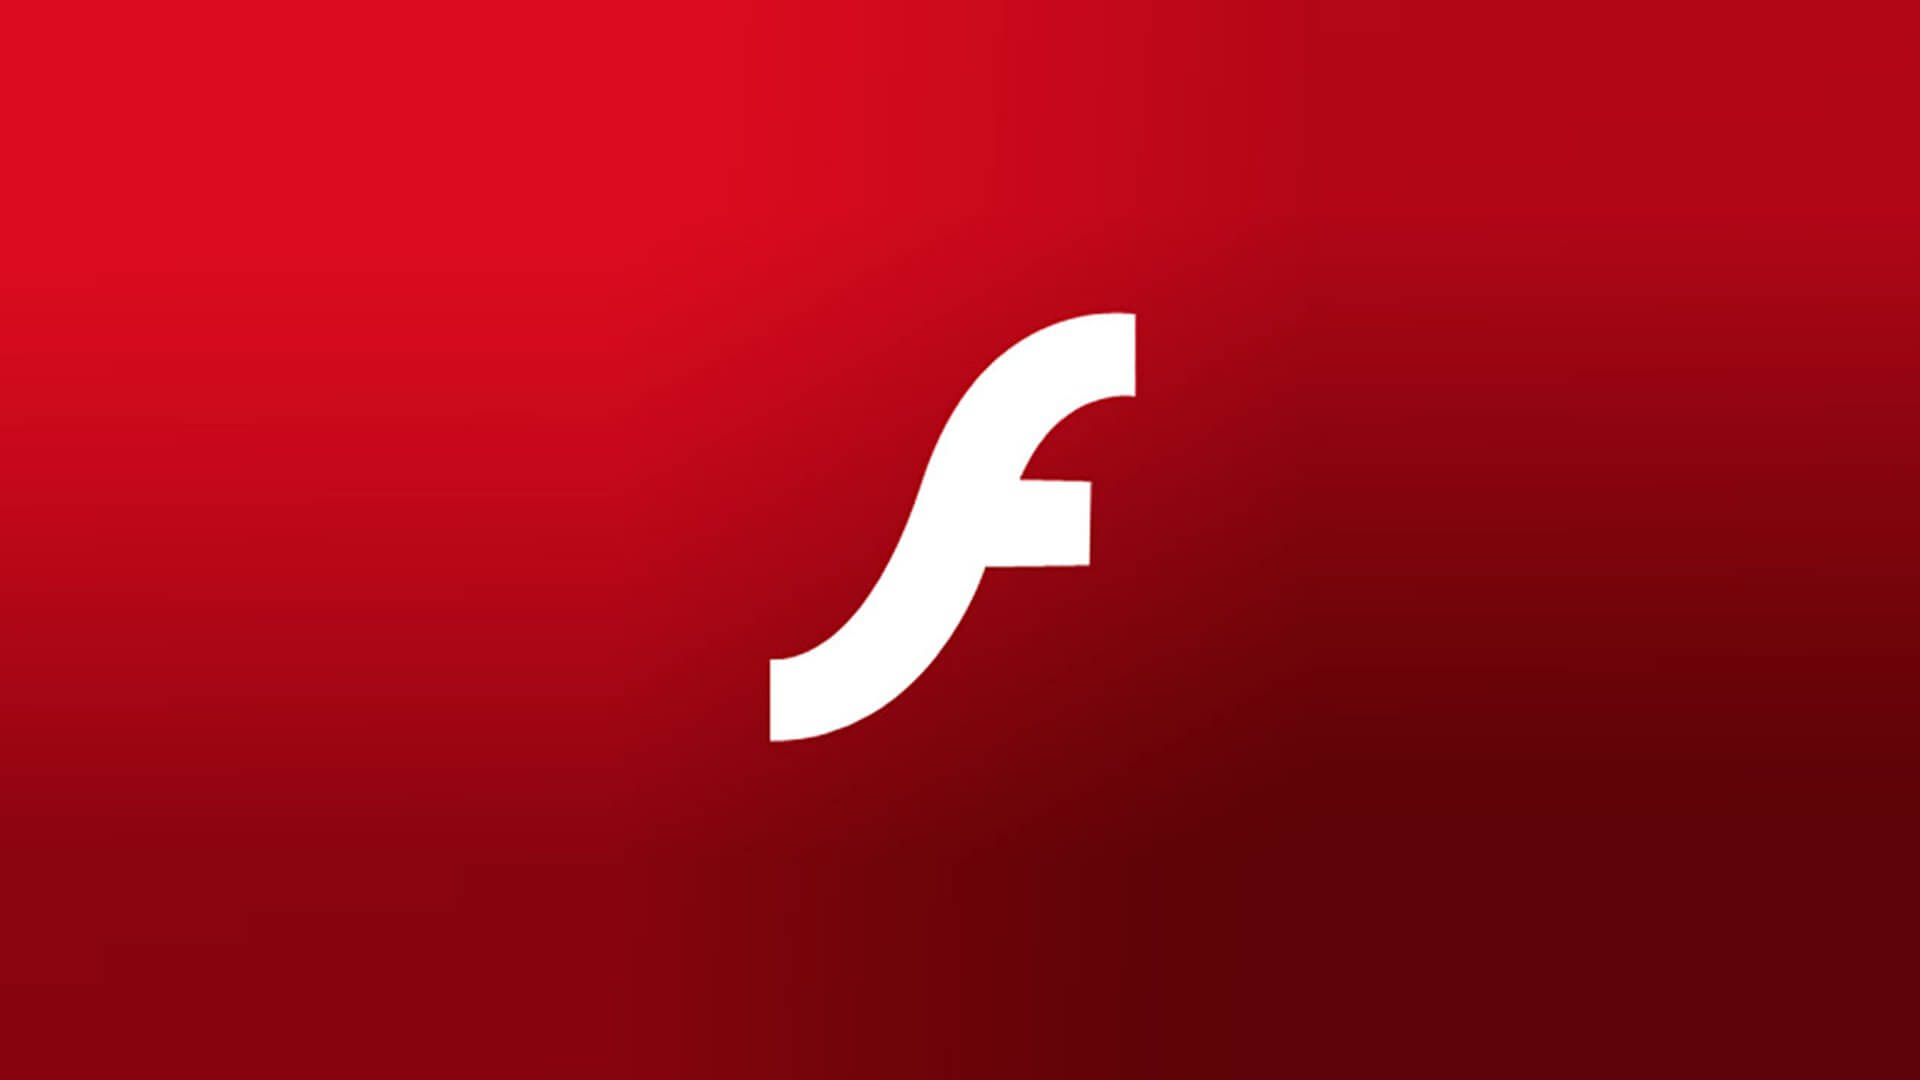 The end of Adobe Flash Player is not near, it's here!